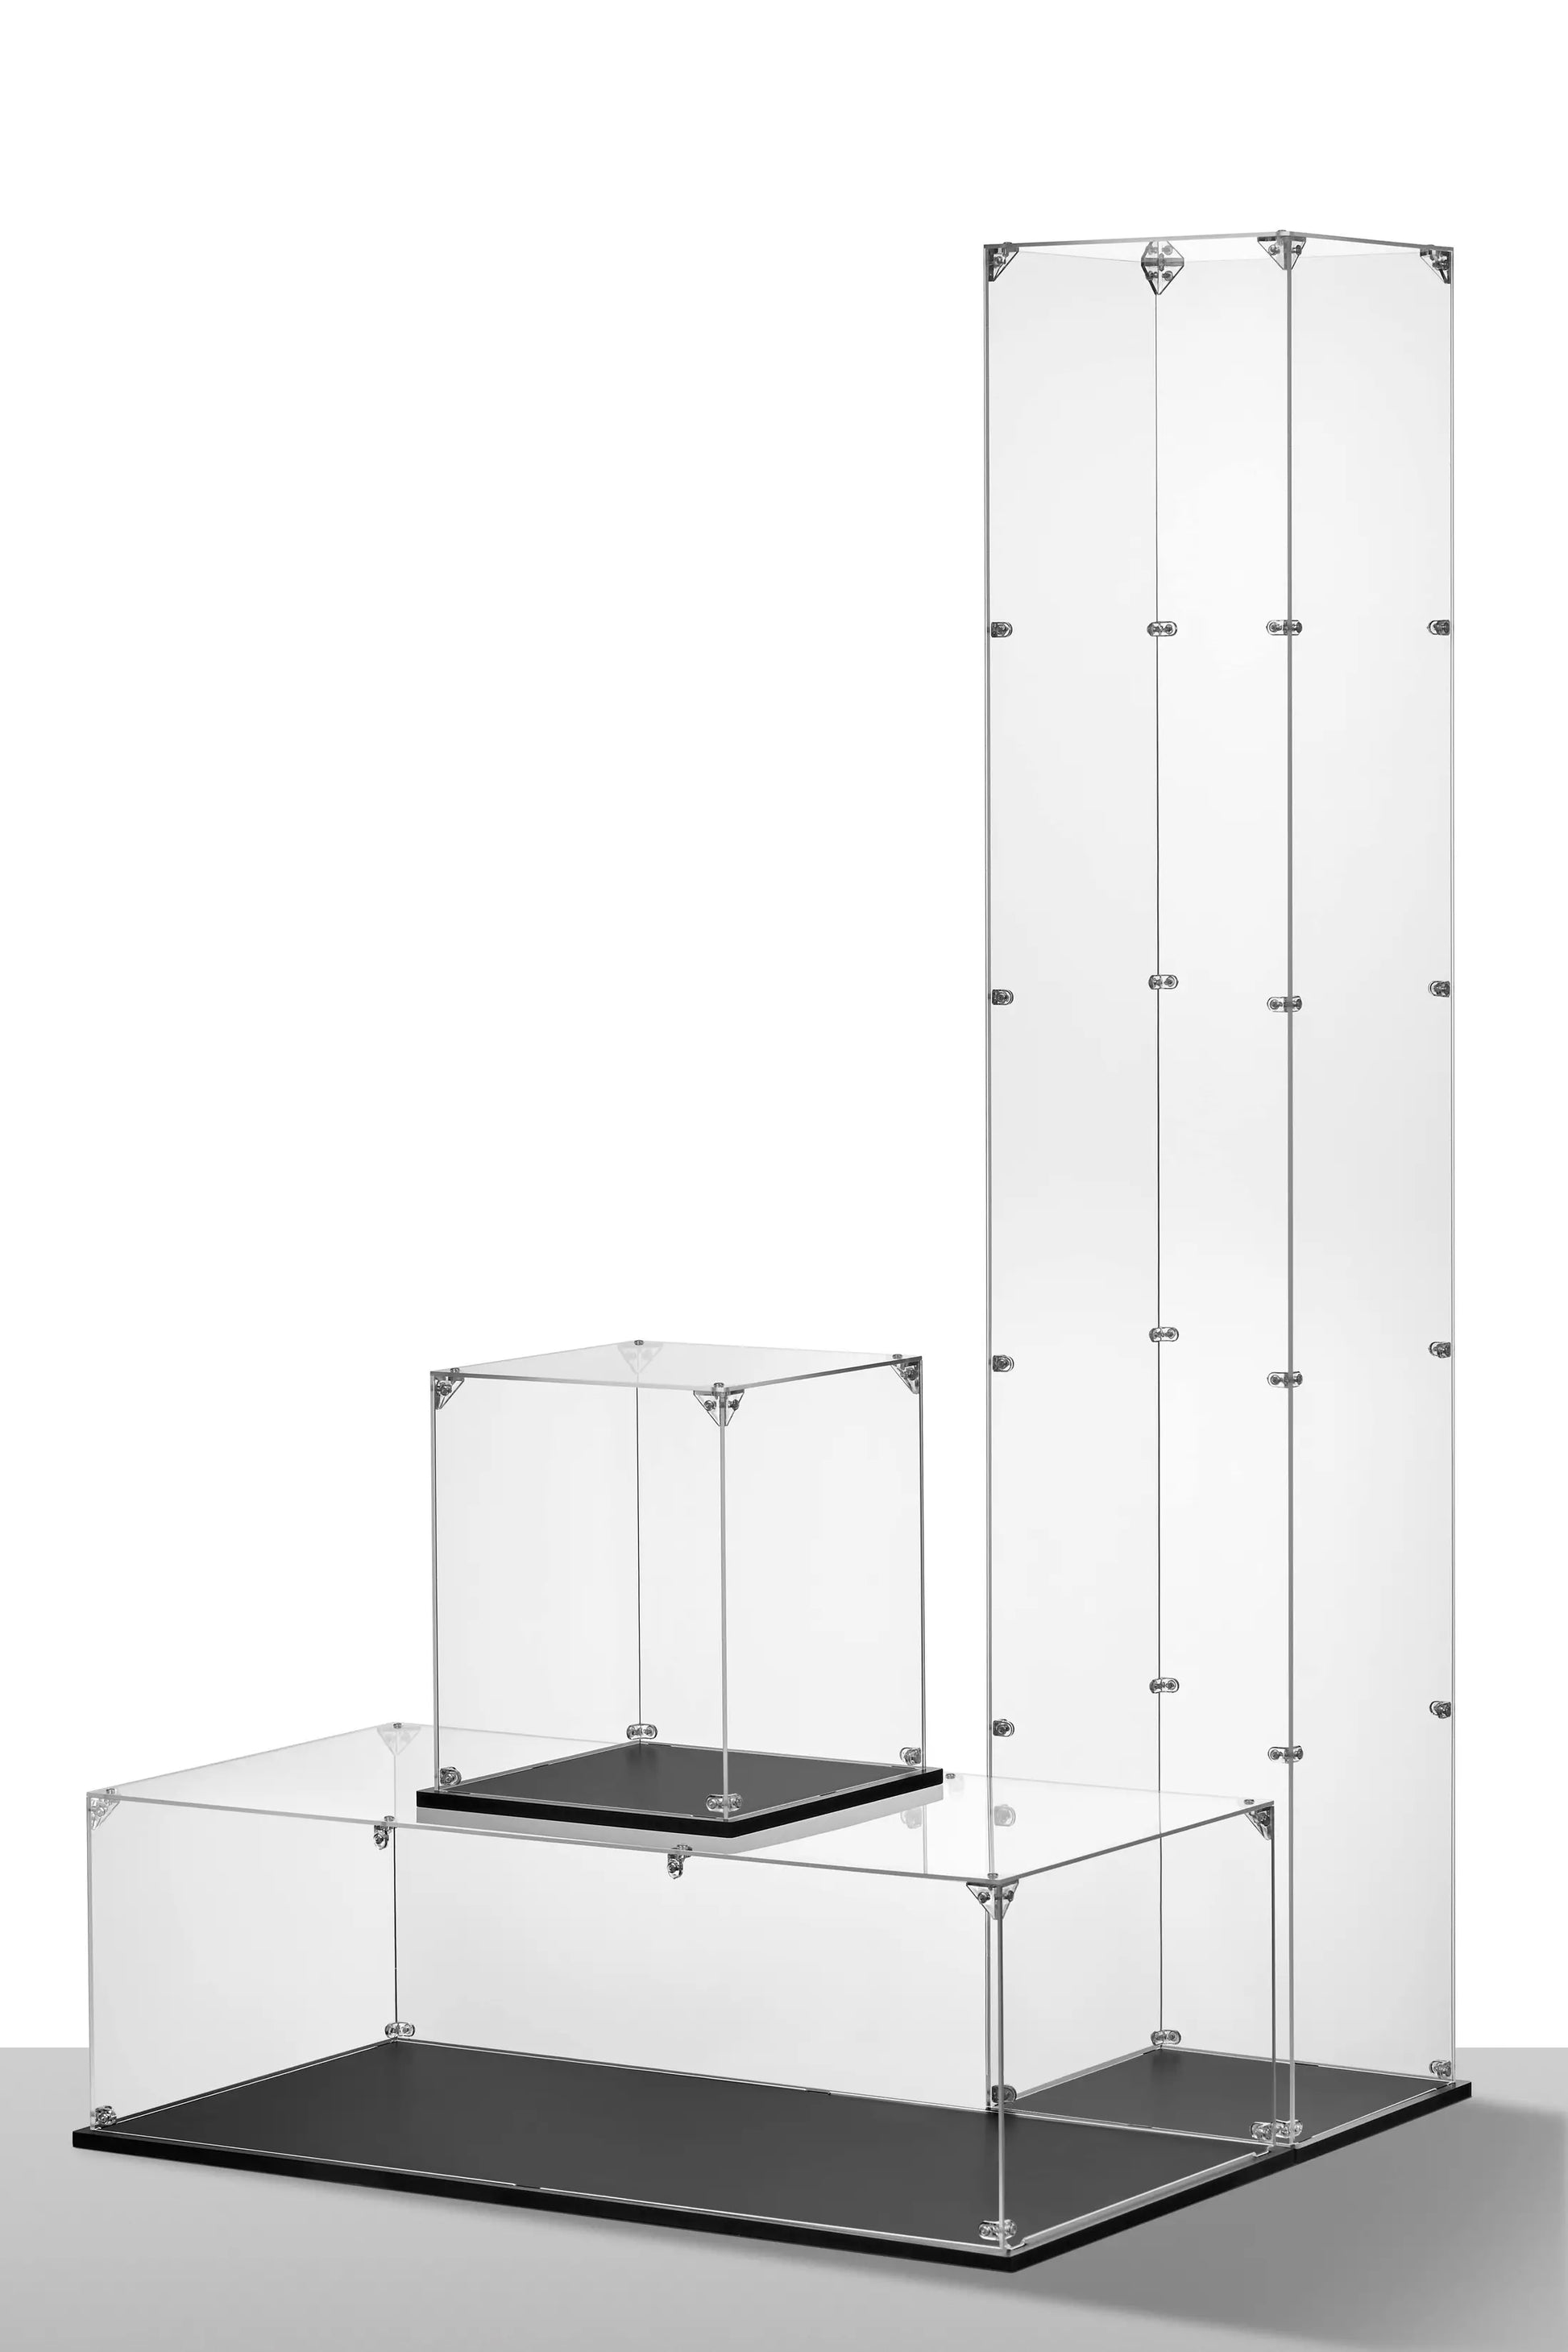 Cm 15 clear acrylic wall display case for Lego and miniature models.